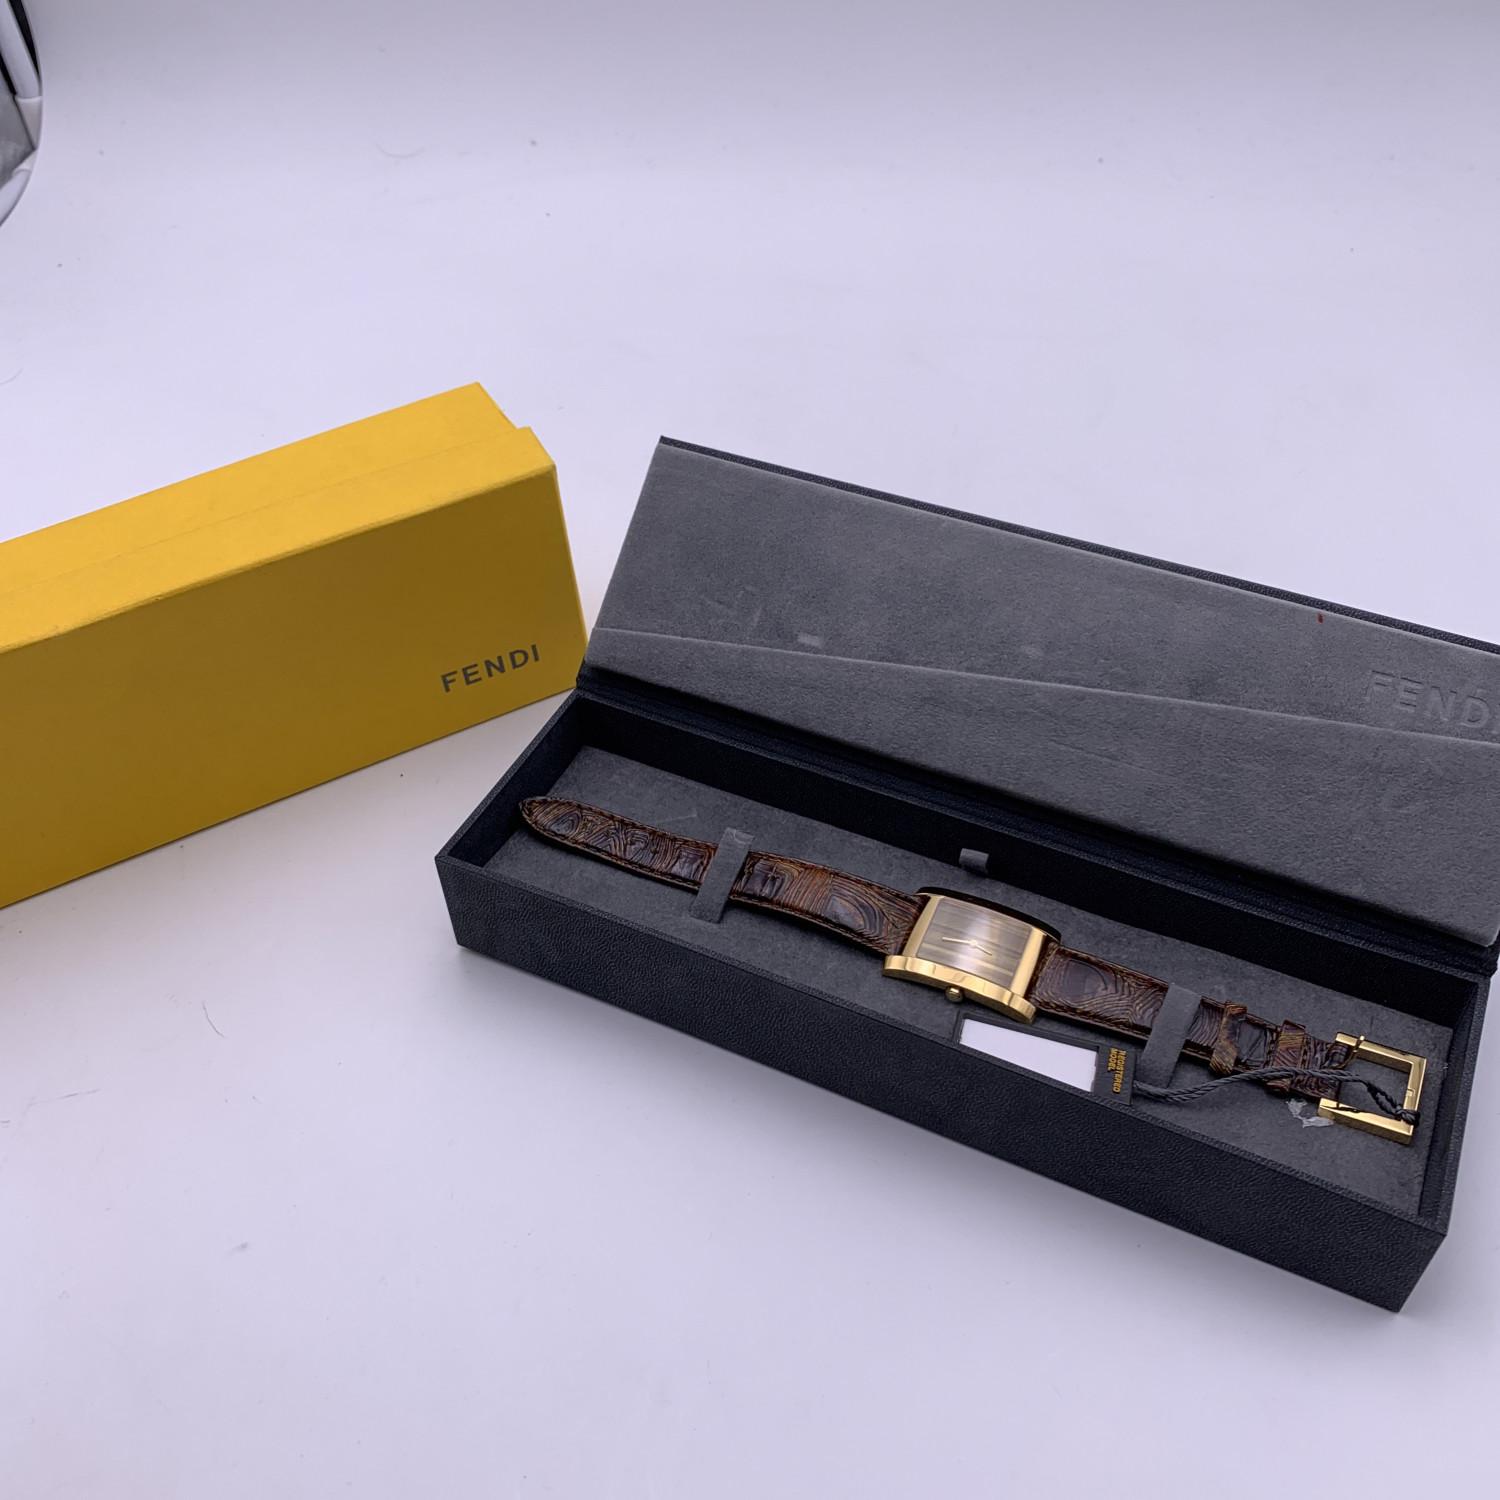 Beautiful Fendi watch, Mod. 7000 G. Rectangle gold plated stainless steel case. Brown striped dial (tiger eye look). Gold metal hands. Scratch resistant sapphire crystal. Swiss Made Quartz movement. Brown leather strap with buckle closure. Water